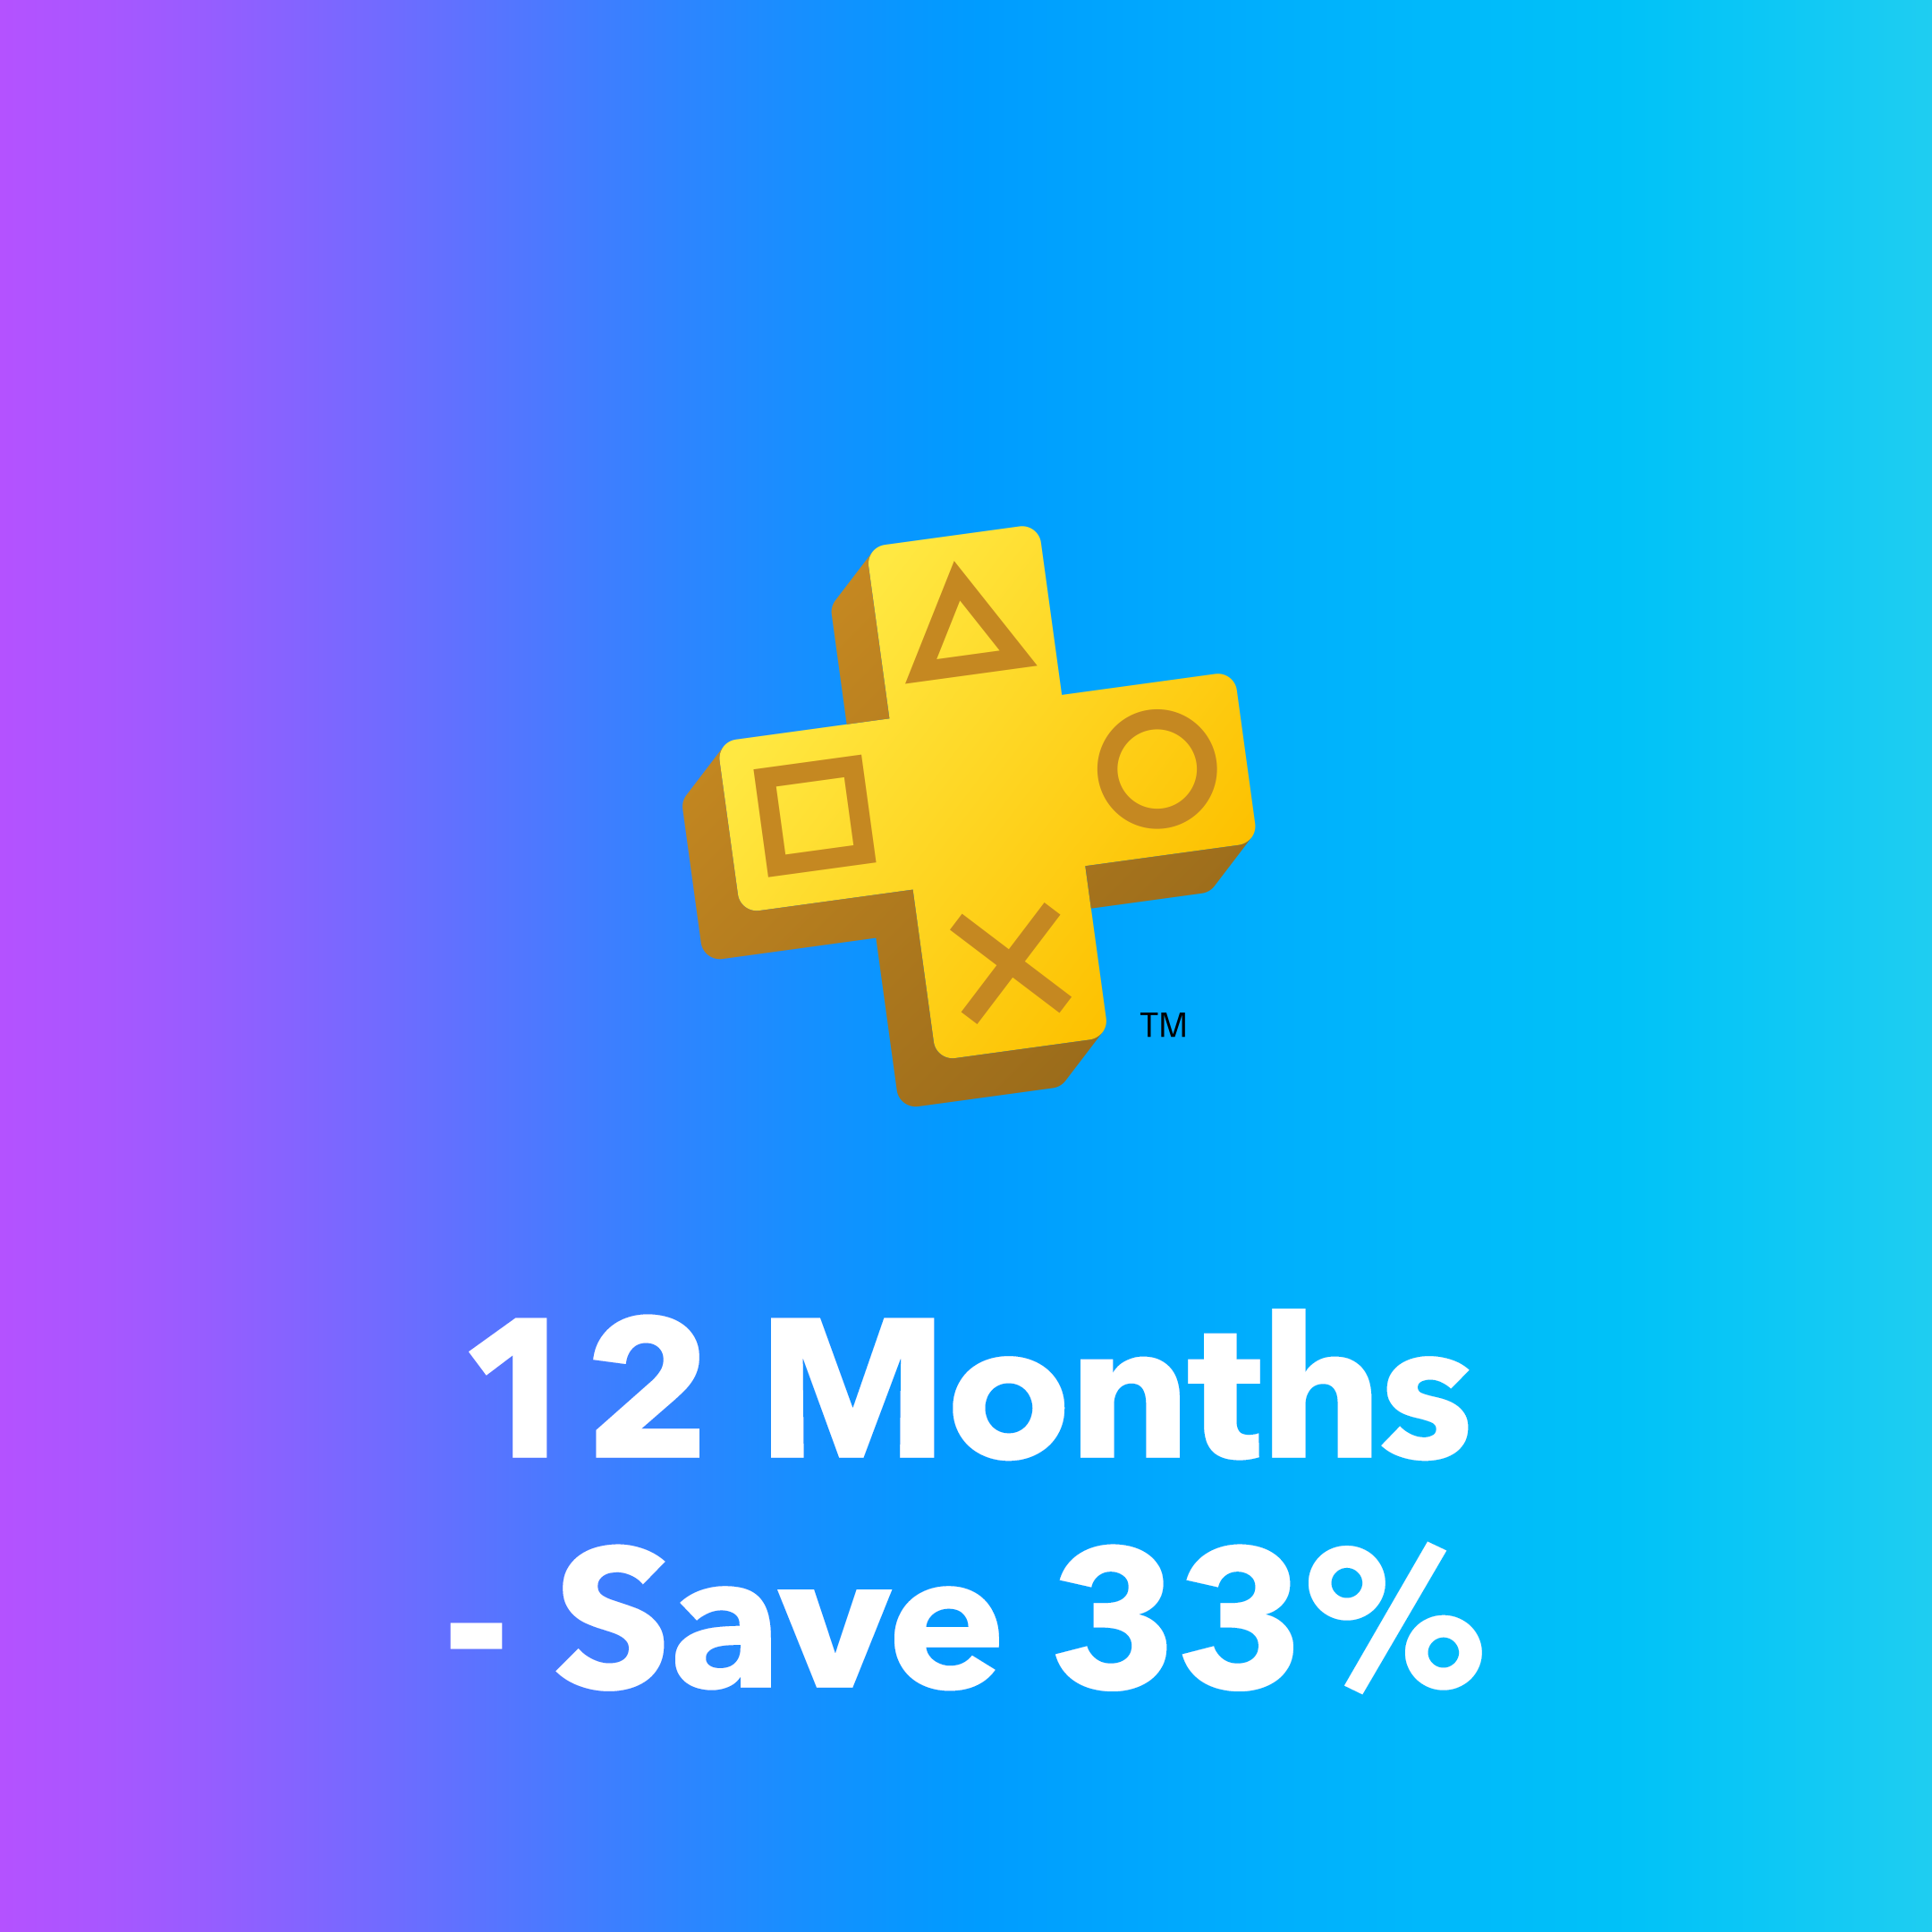 [PROMO] Black Friday 21 - PS Plus Offer